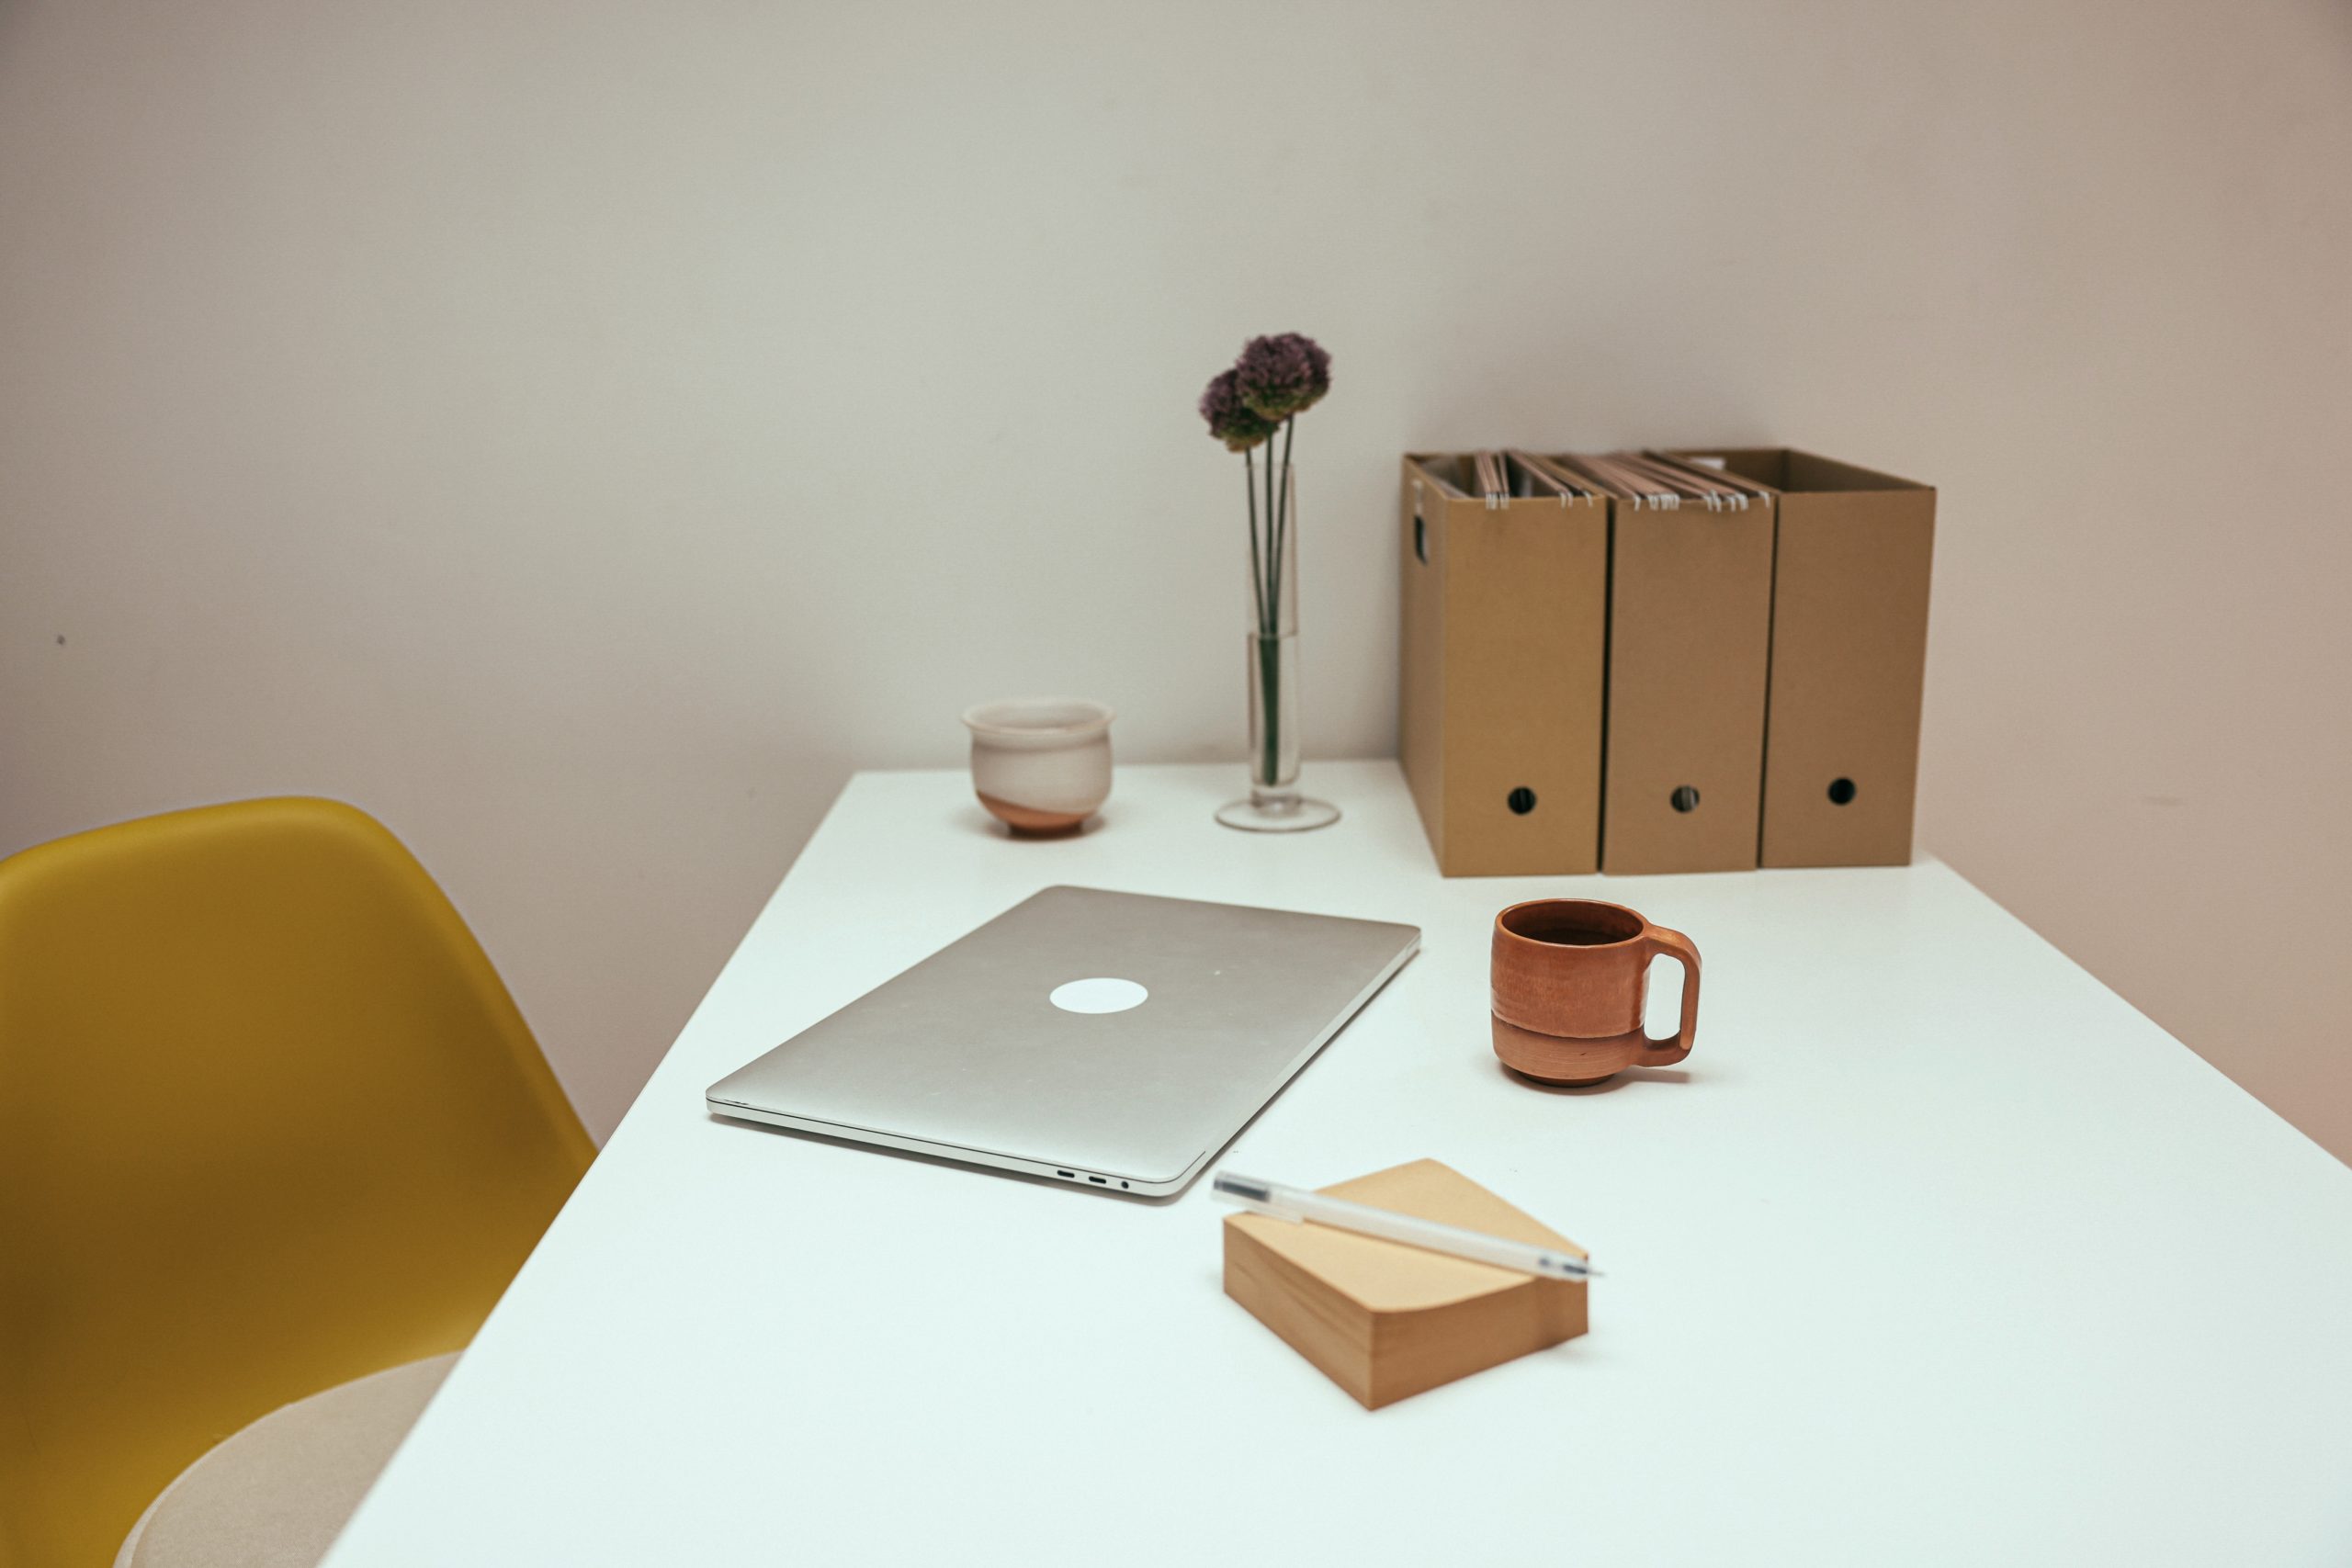 A white desk has some magazine file boxes, a glass vas of fake flowers, a small ceramic vase, a laptop, a mug, some sticky notes and a pen lying on it. There is a yellow plastic chair under the desk.